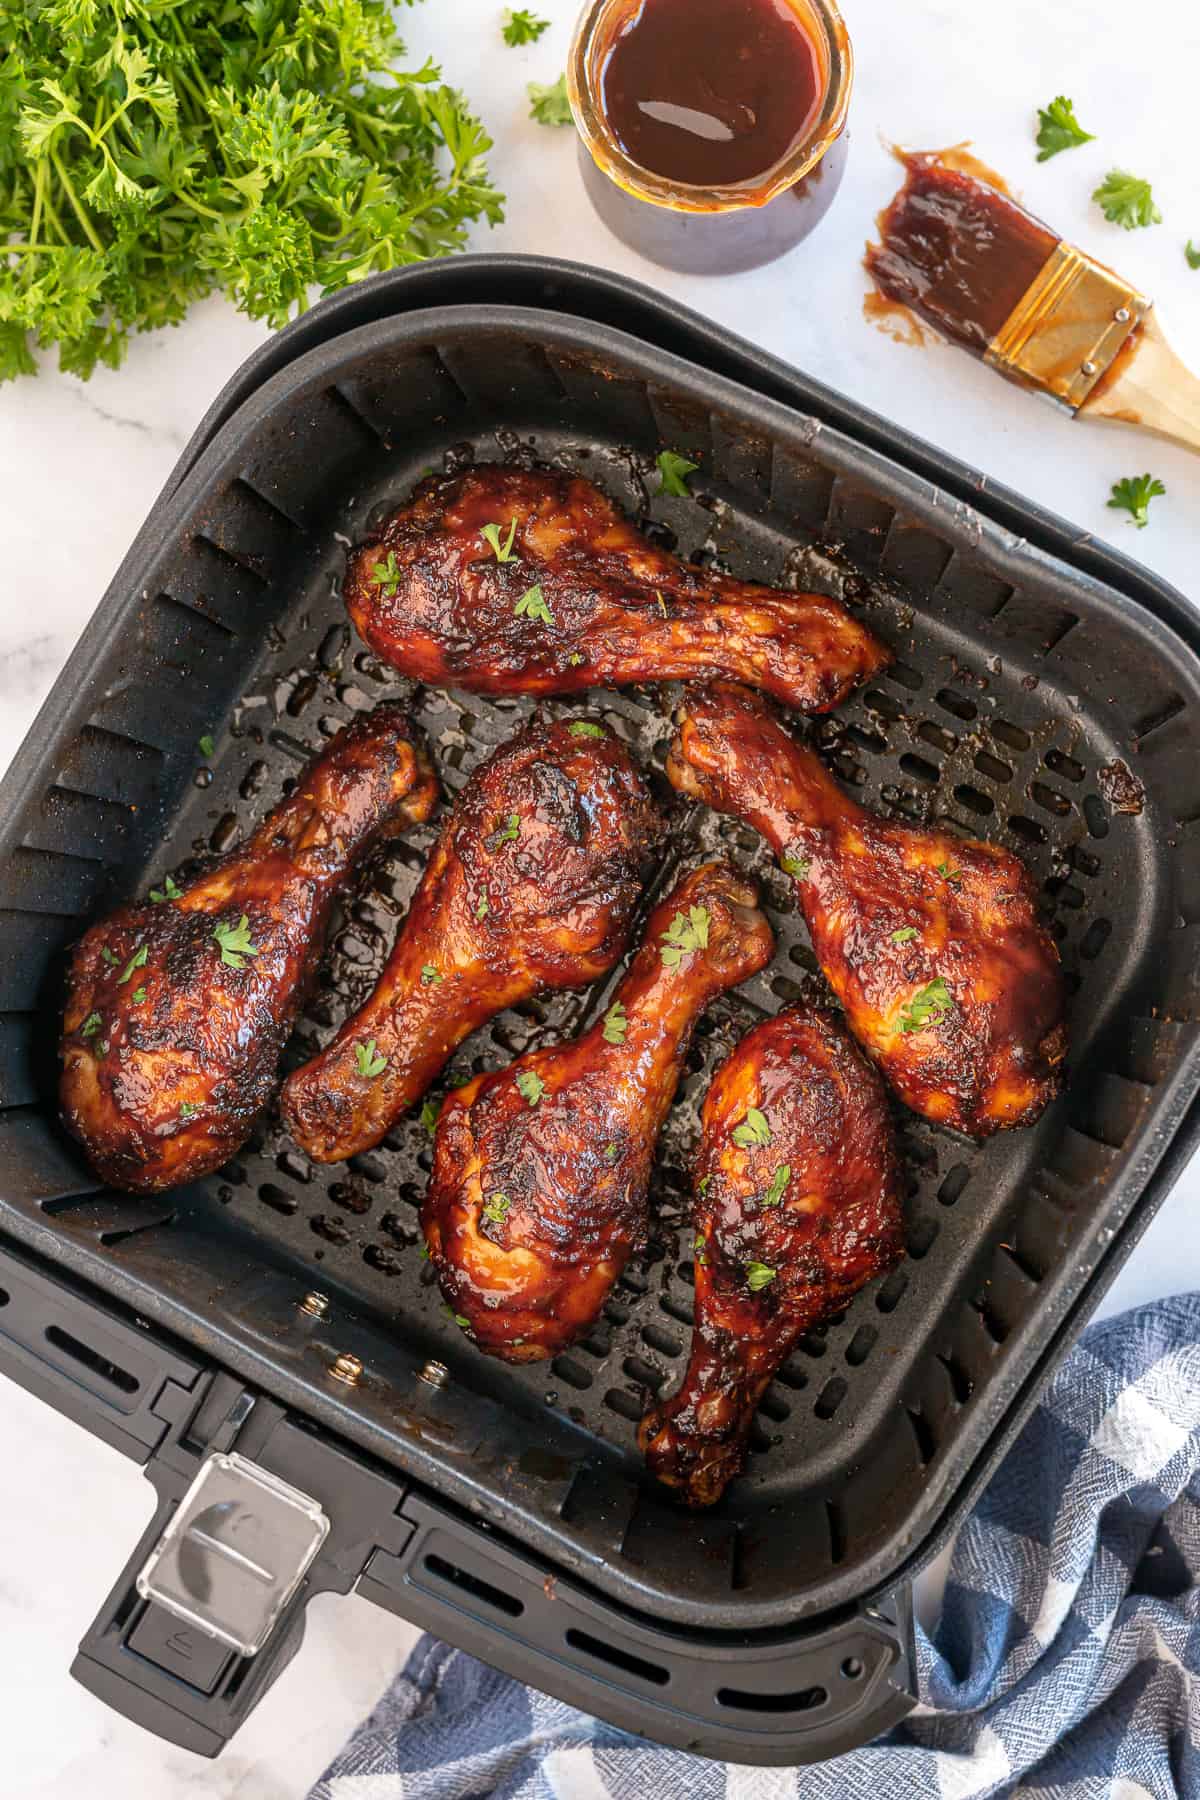 An over the top shot of an air fryer basket filled with BBQ chicken drumsticks.